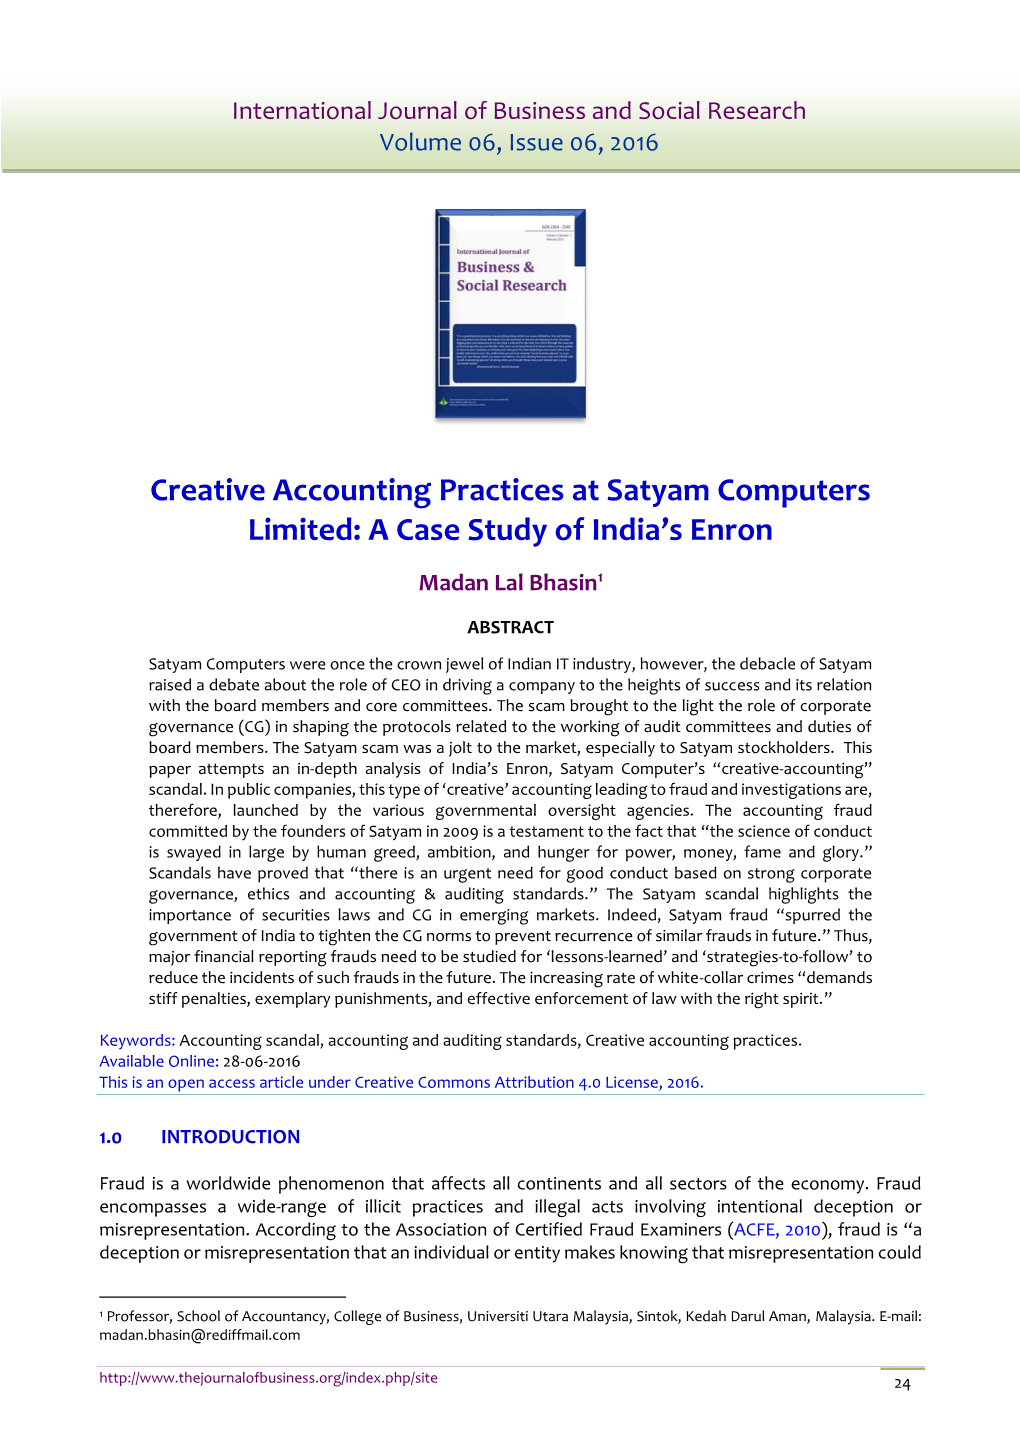 Creative Accounting Practices at Satyam Computers Limited: a Case Study of India’S Enron